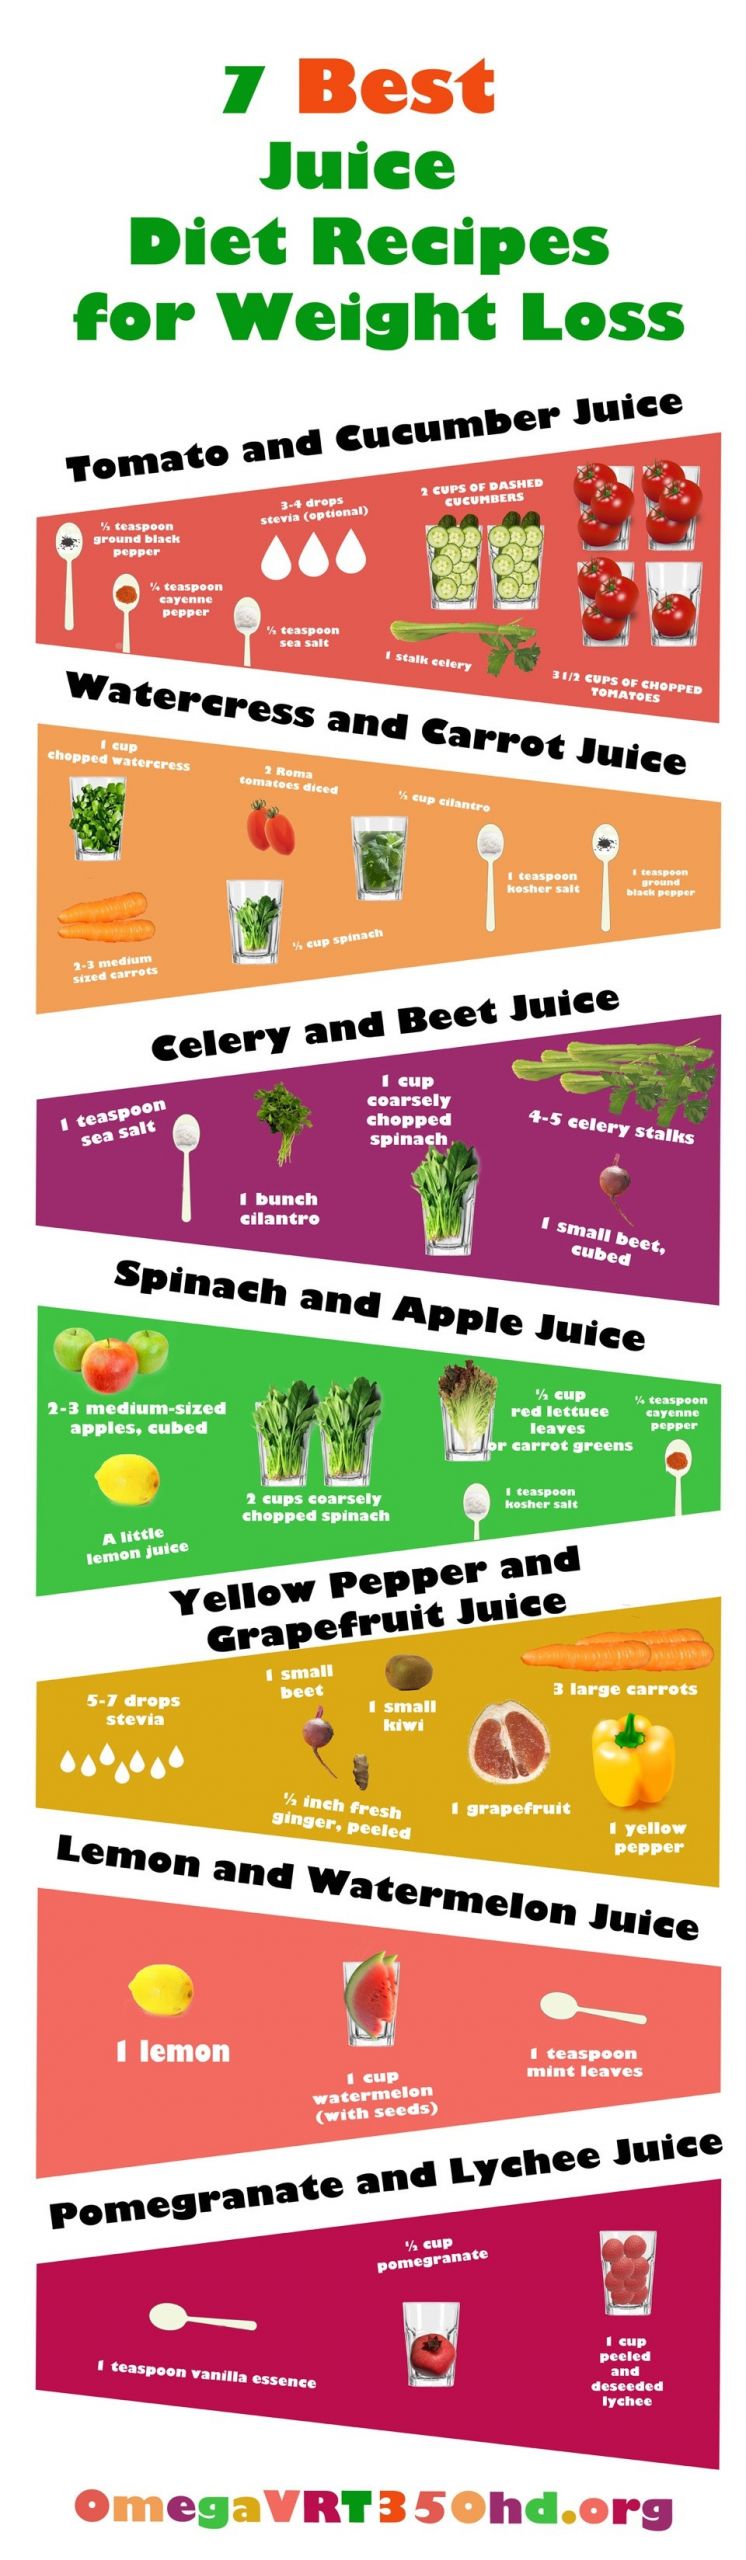 Juicing Weight Loss Recipes
 7 Simple Juicing Recipes for Weight Loss Infographic